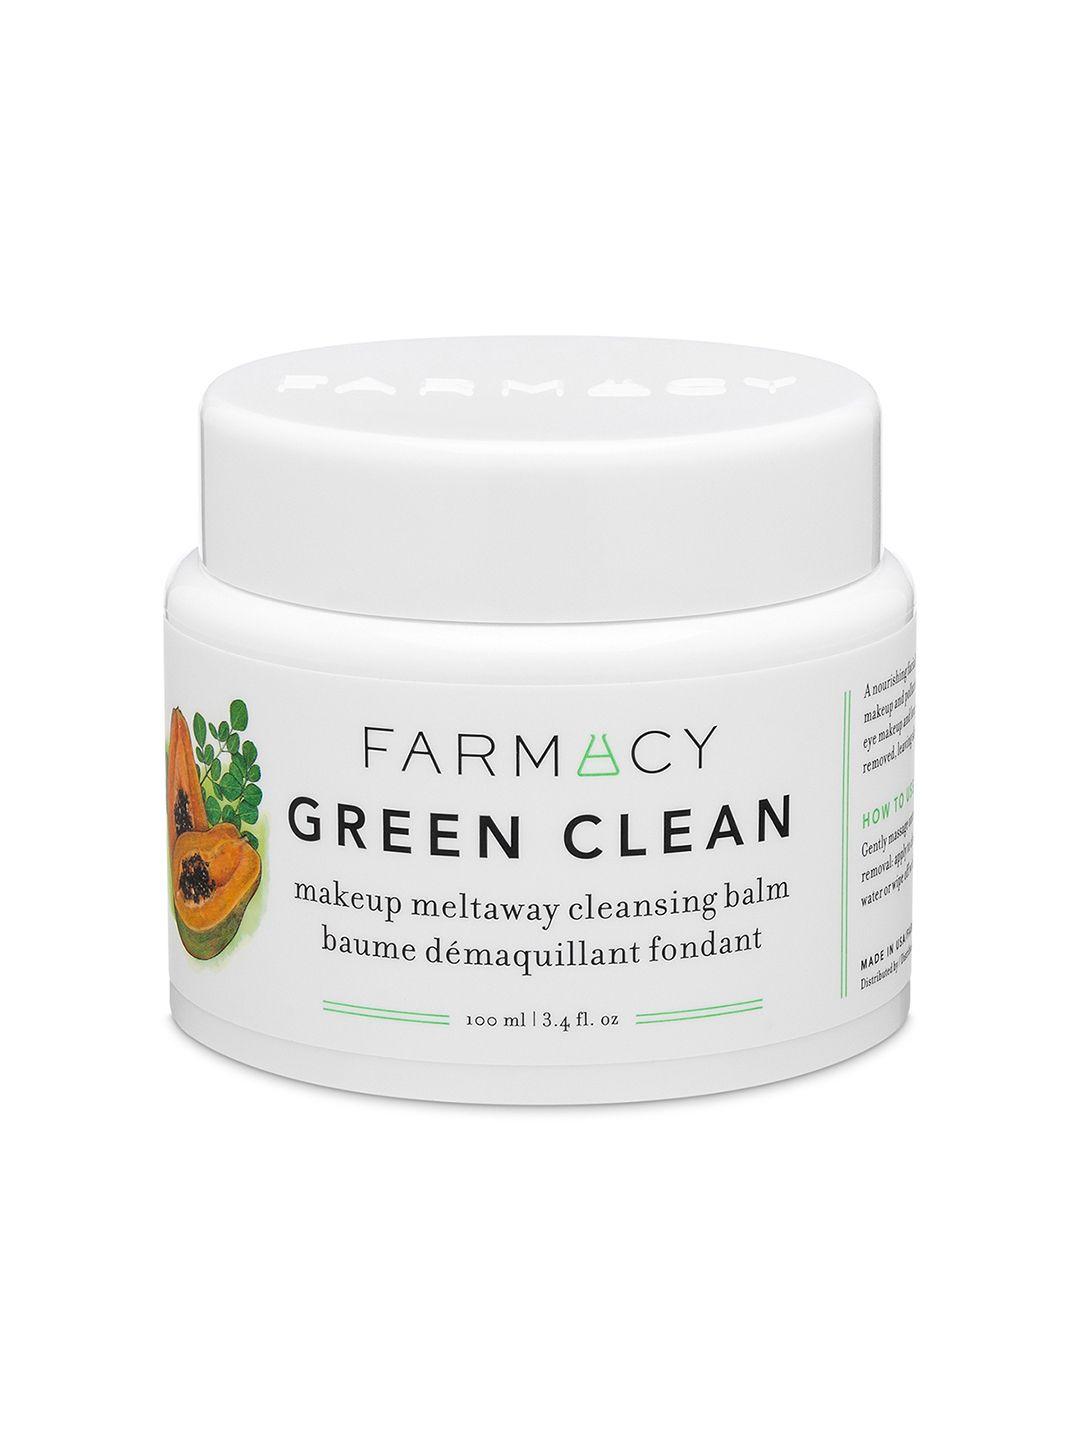 farmacy beauty green clean makeup removing cleansing balm with papaya & turmeric - 100ml